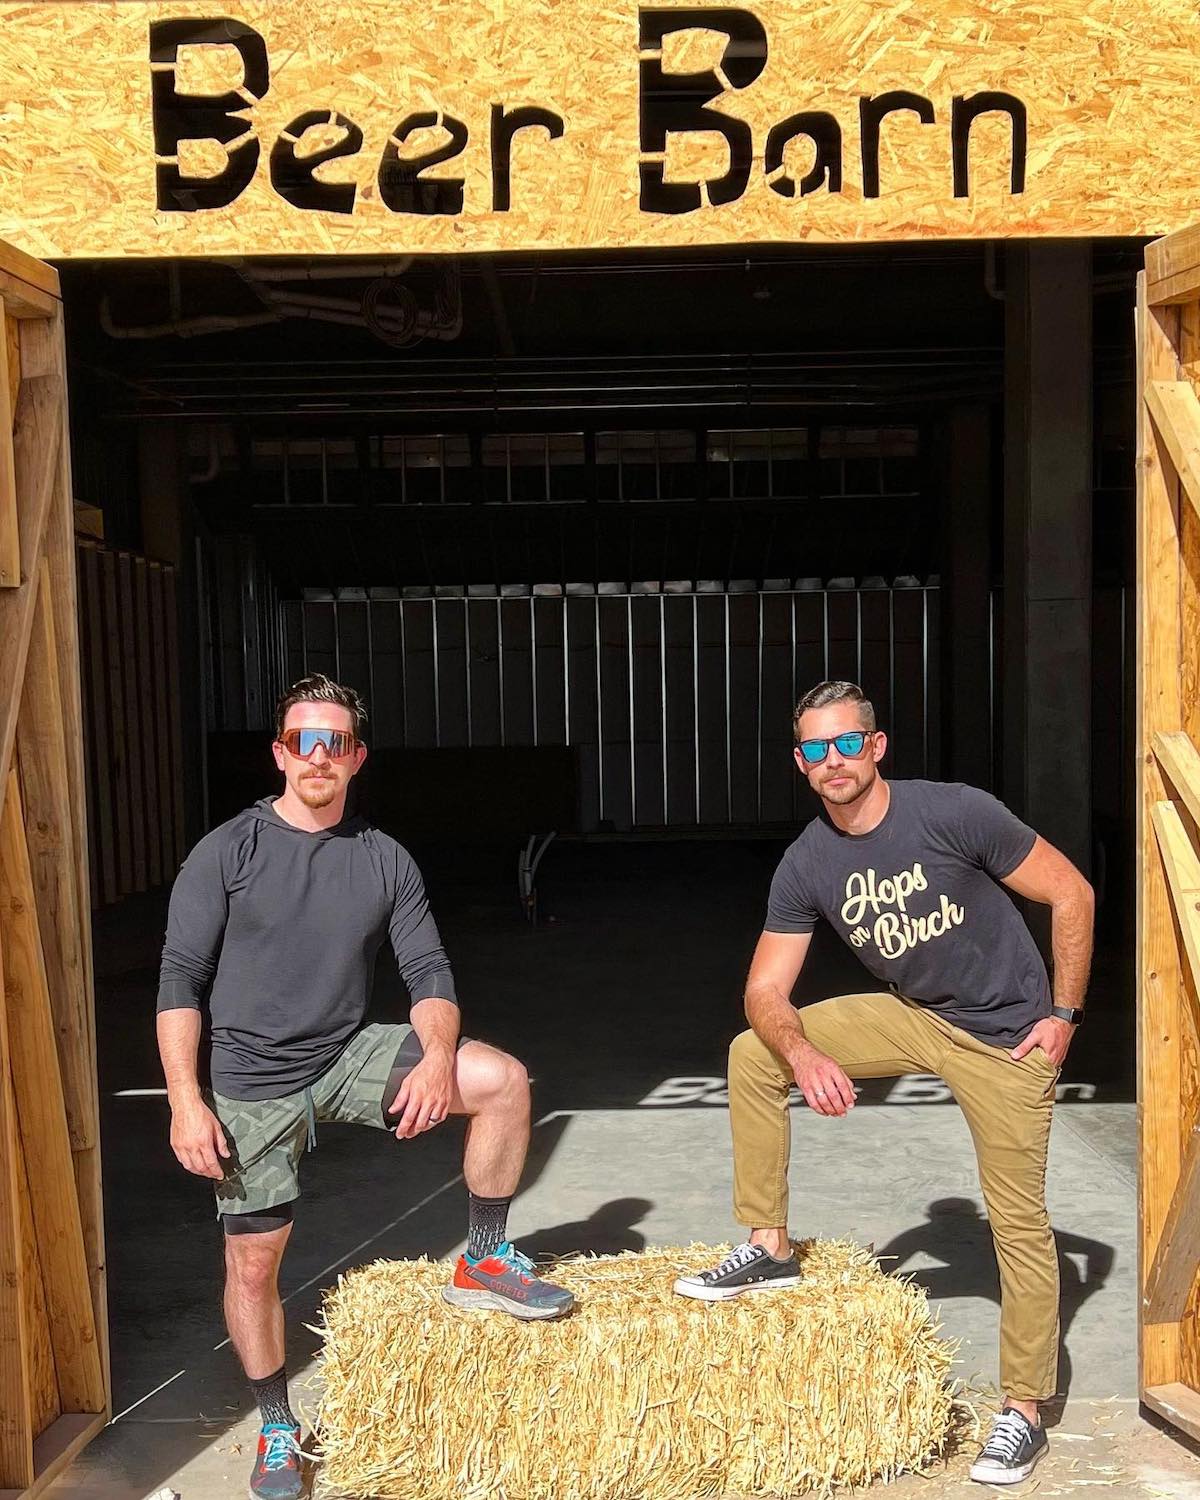 Beer Barn Almost Ready to Make Debut in Gilbert